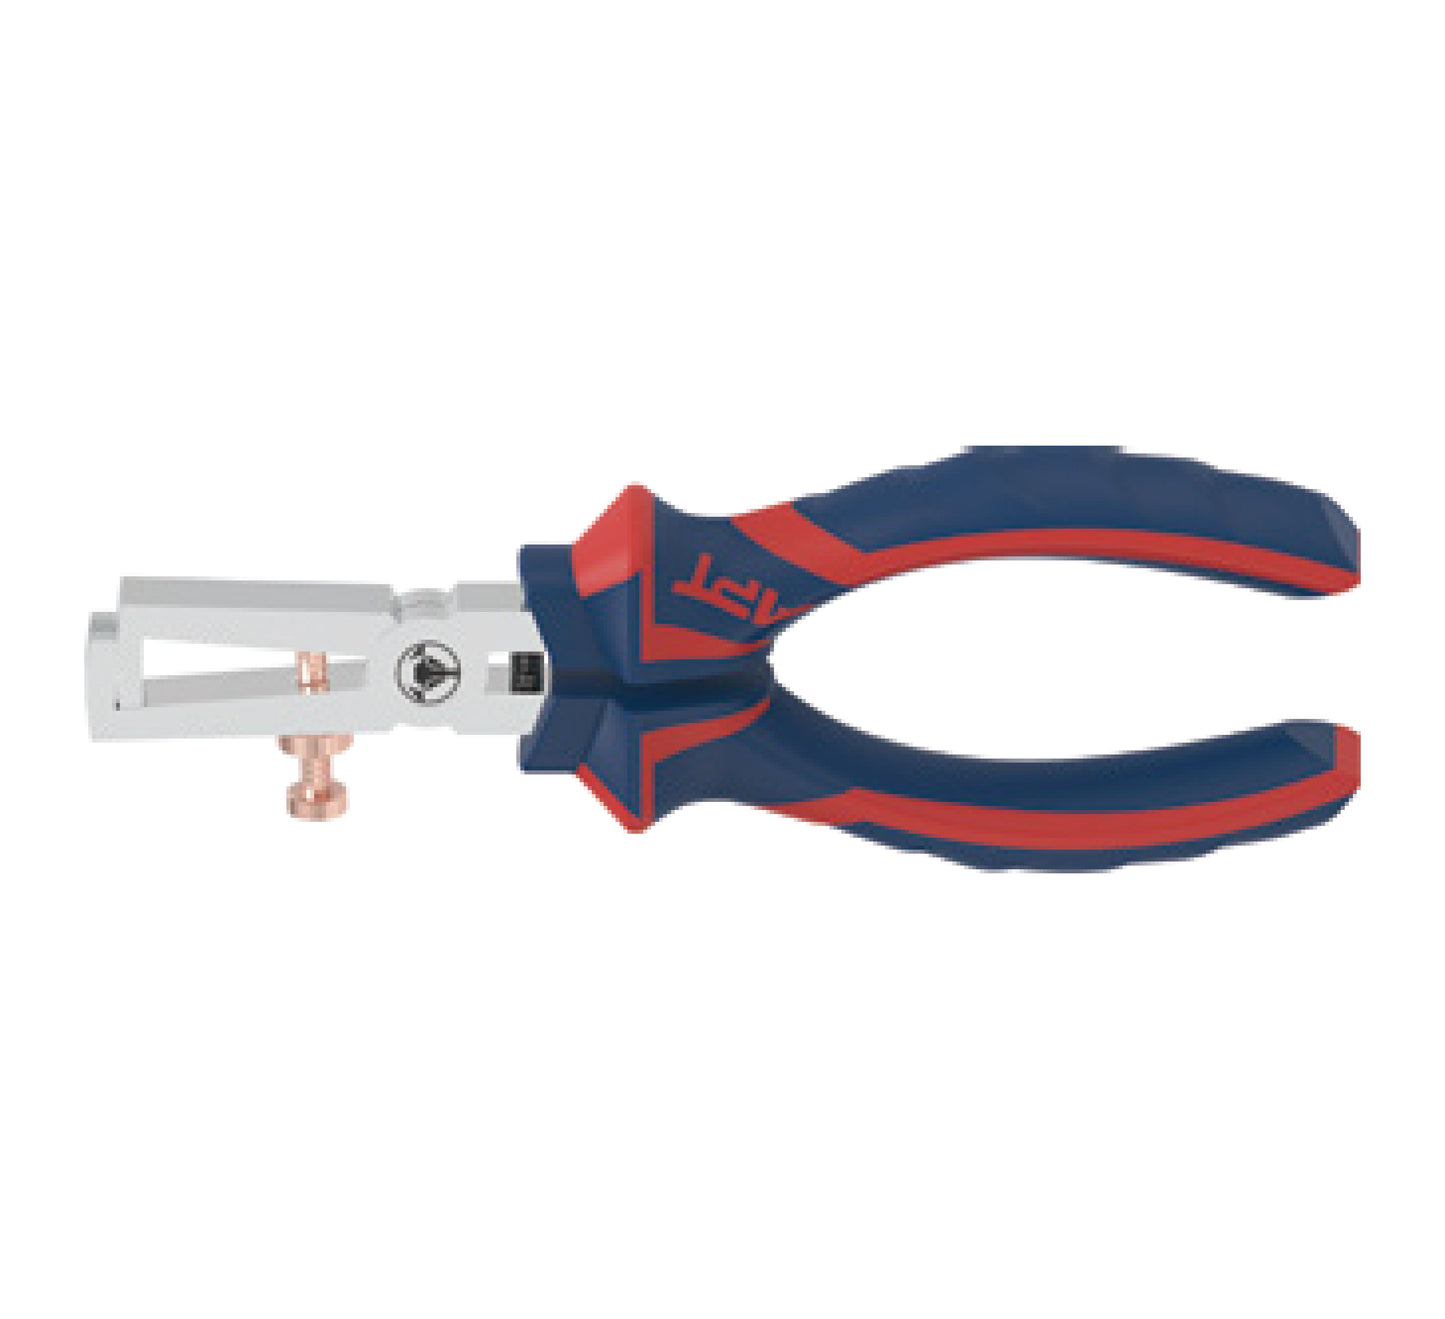 APT WIRE STRIPER PLIER NEW APT 2 COLOR HANDLE PP CARD NICKLE PLATED 150MM-NEW APT PP CARD WITH RED STRAP AH1412540-160